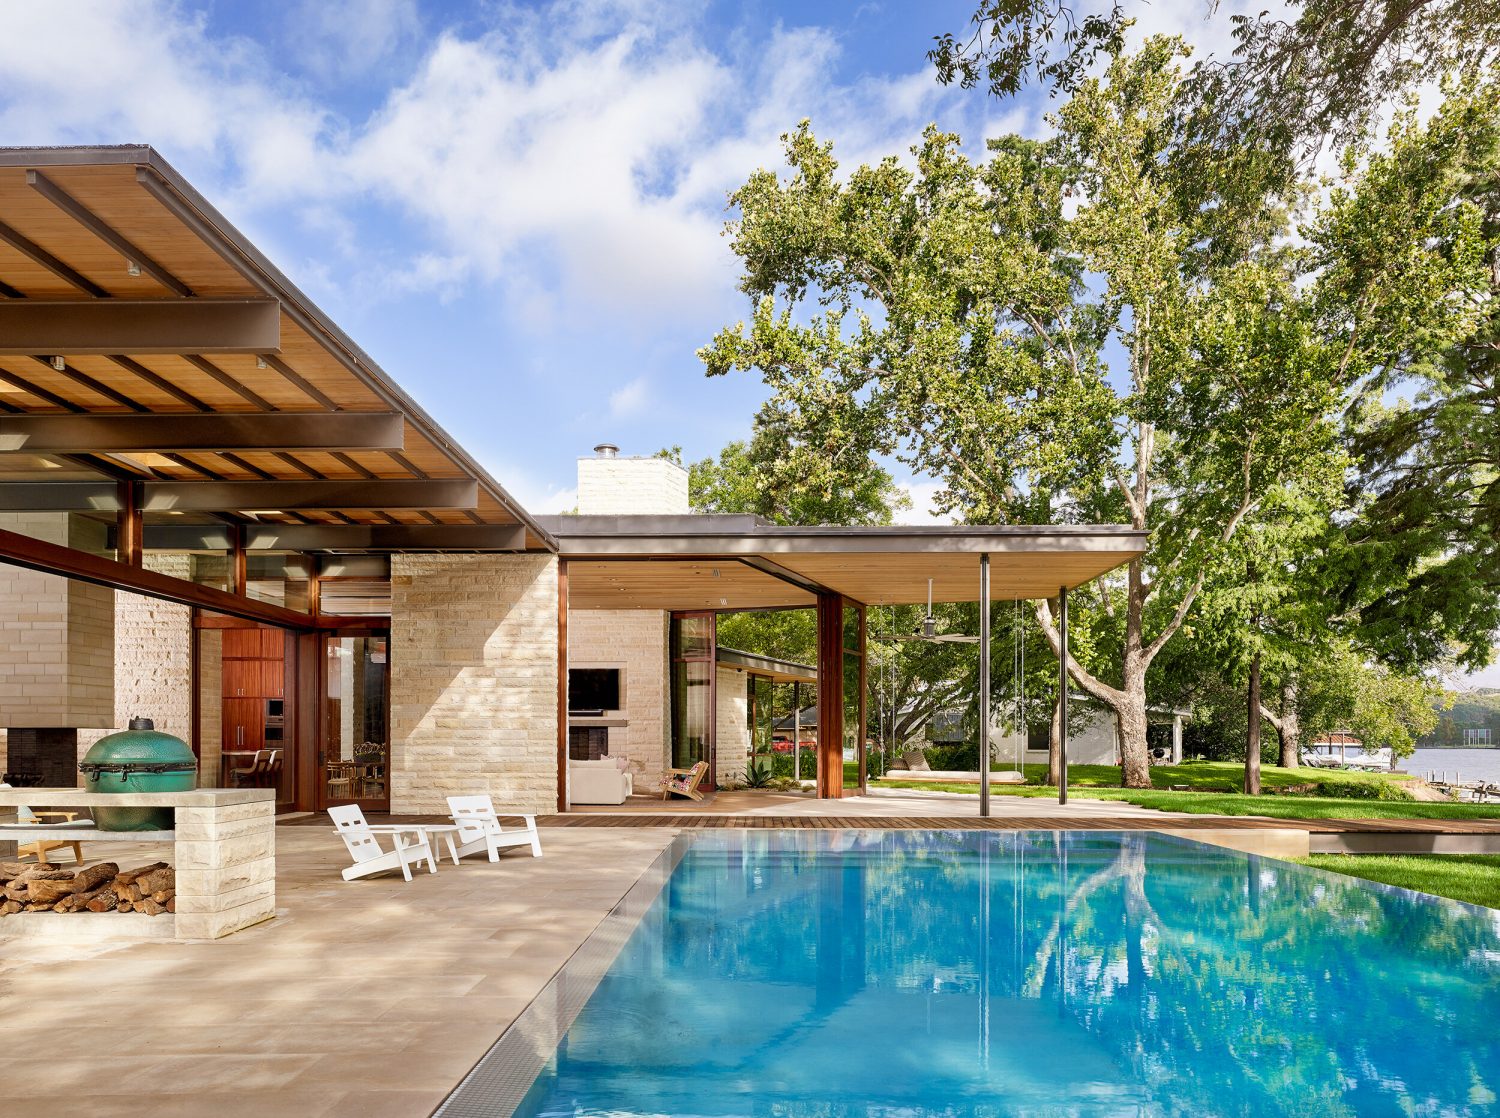 Lake Austin Residence by A Parallel Architecture